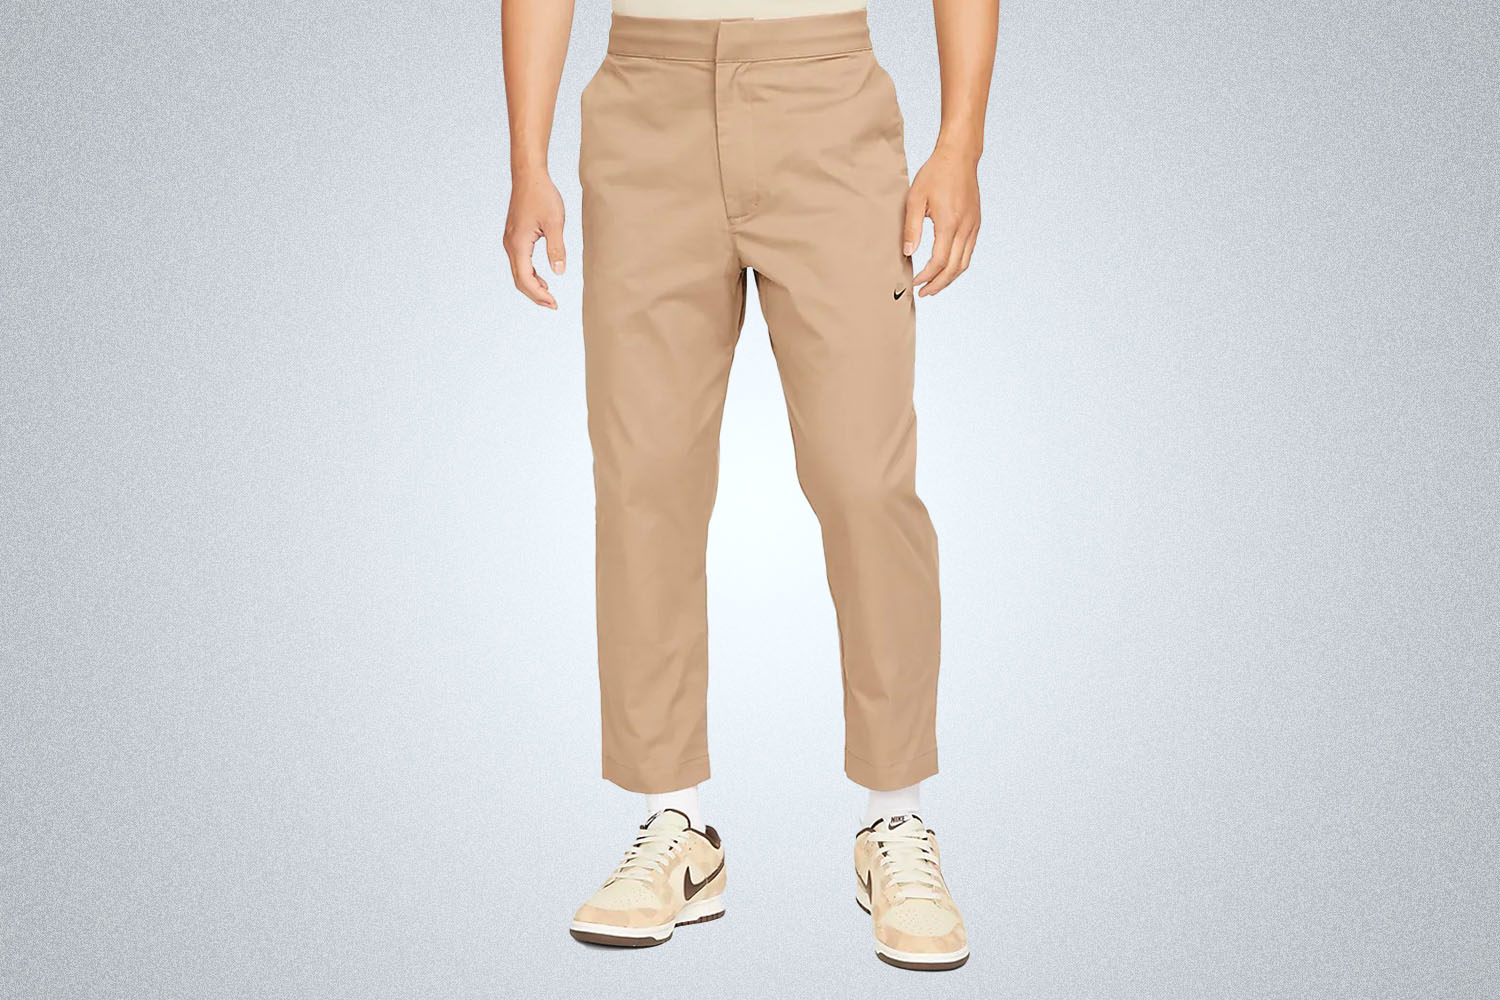 a pair of cropped Khaki nike pants on a grey background